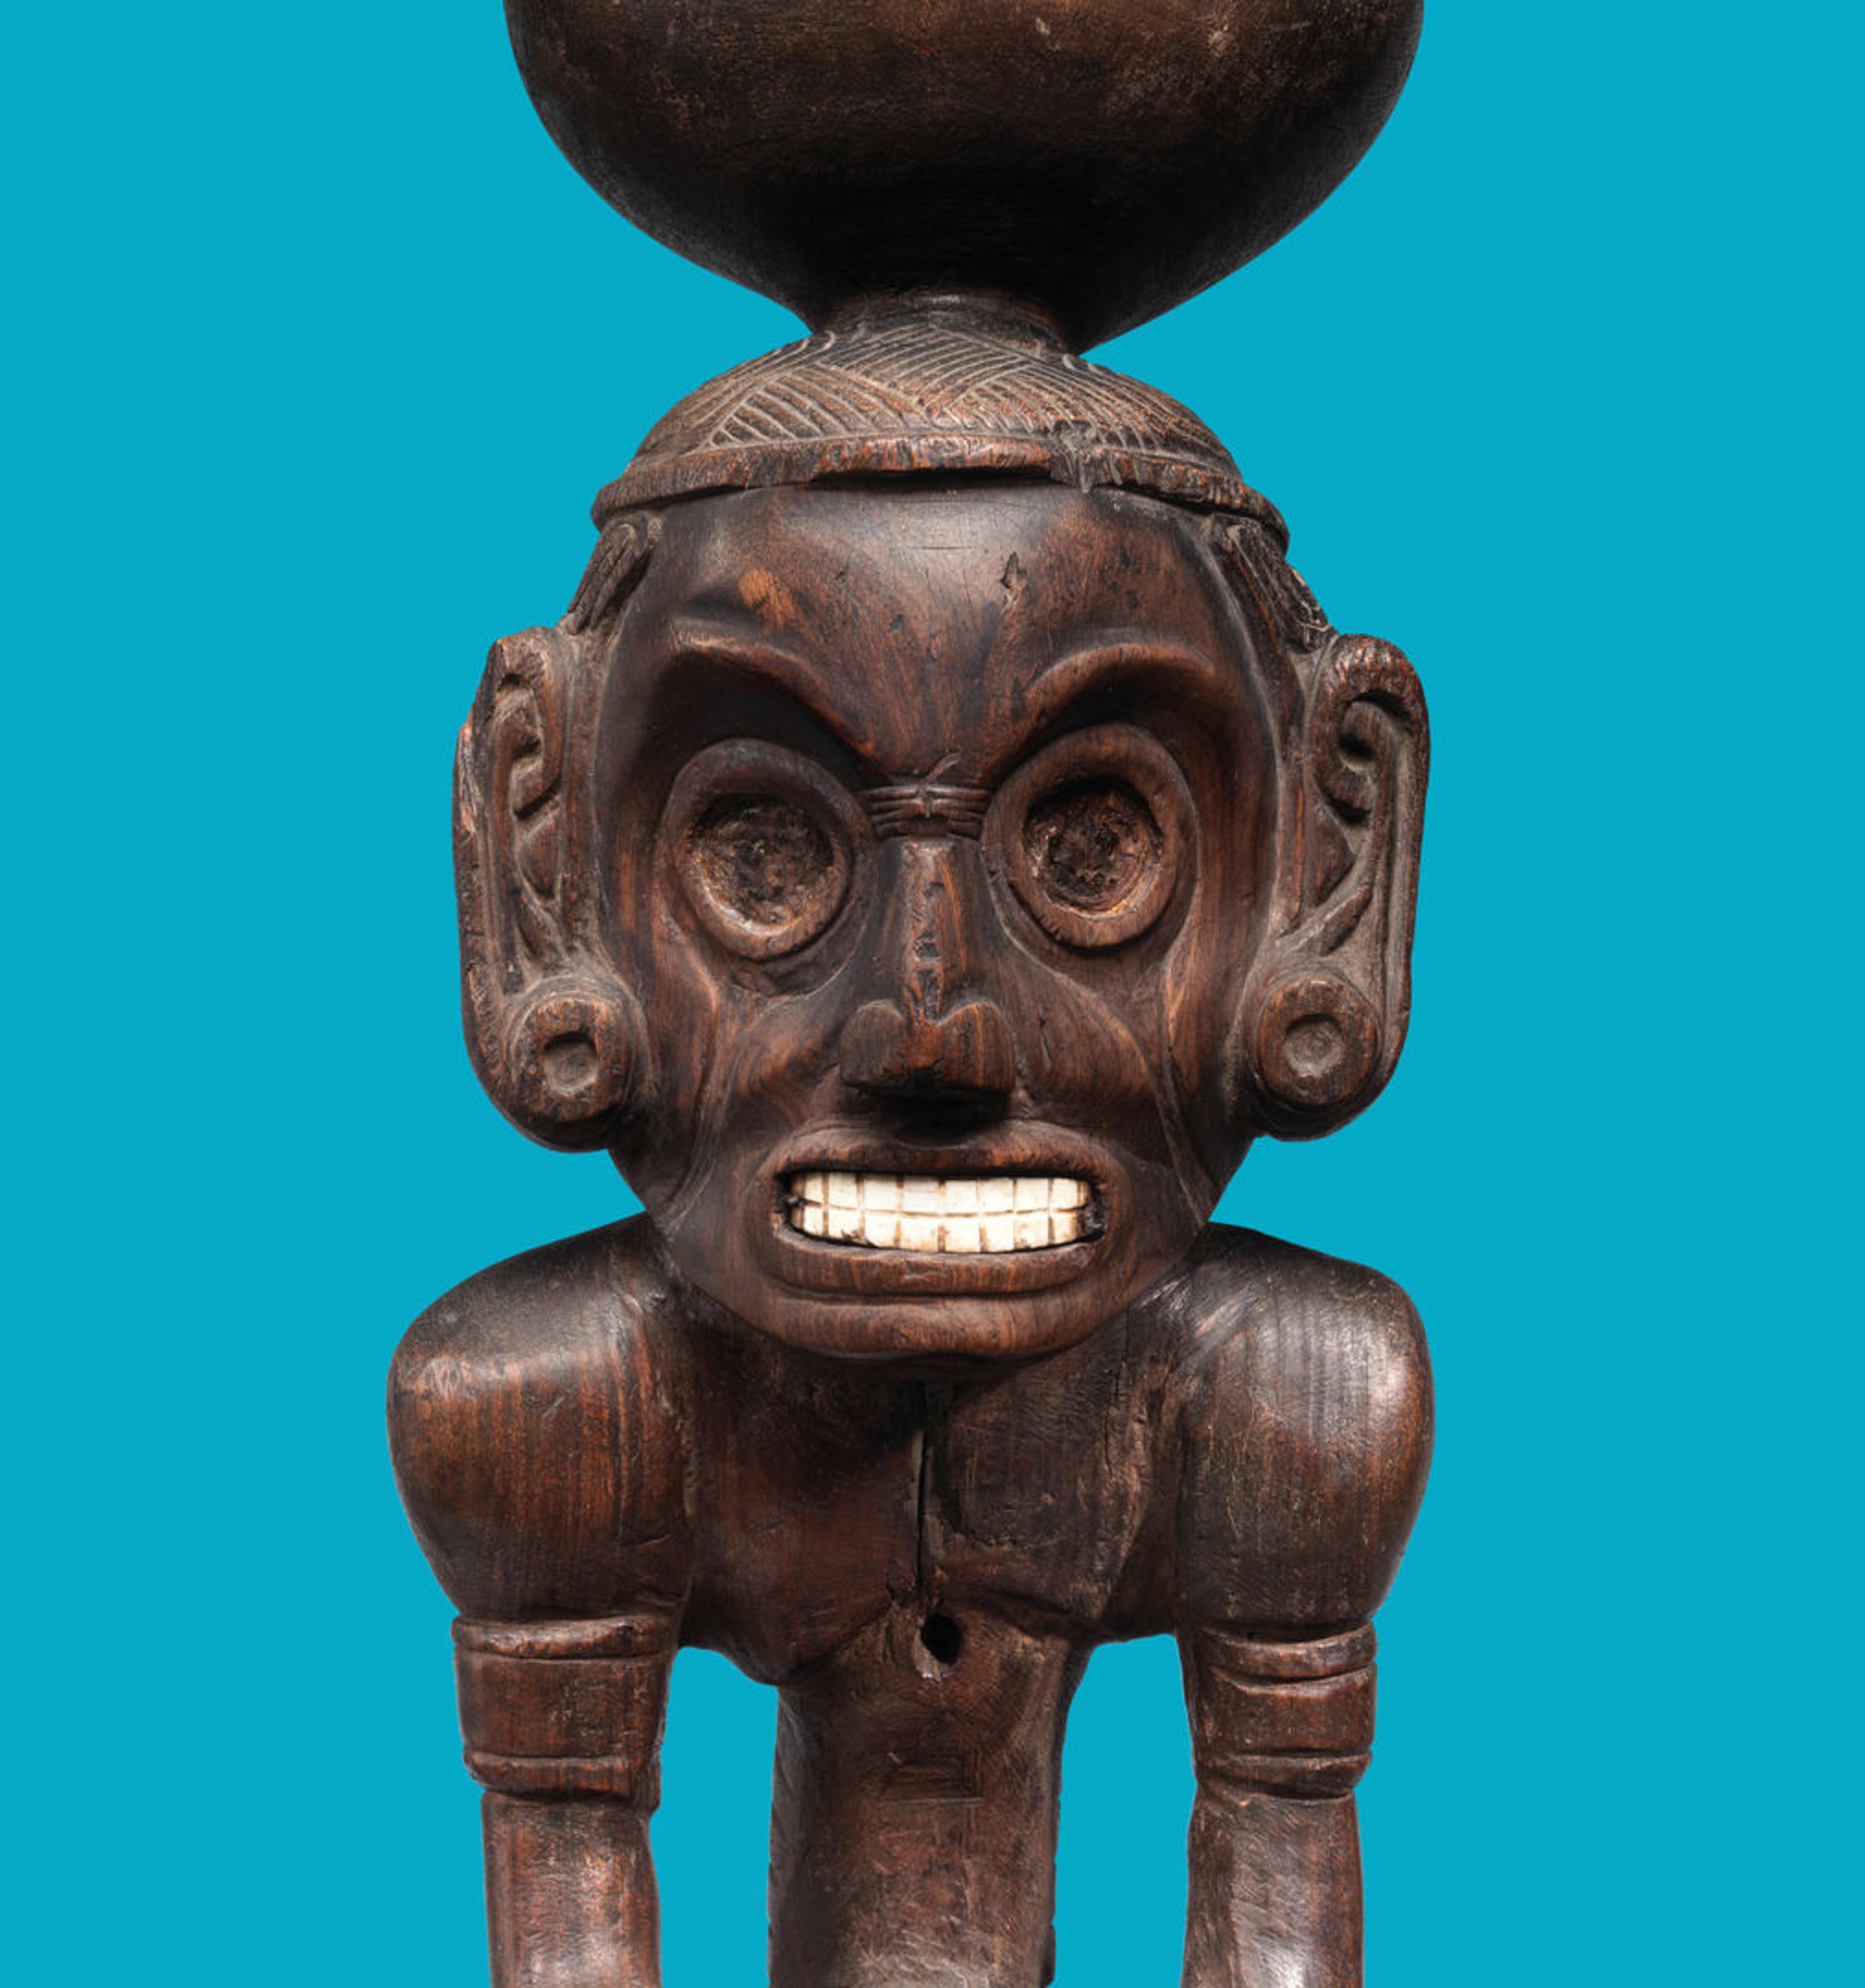 Color image of a wooden anthropomorphic deity figure (zemí) made in the Dominican Republic ca. AD 1000